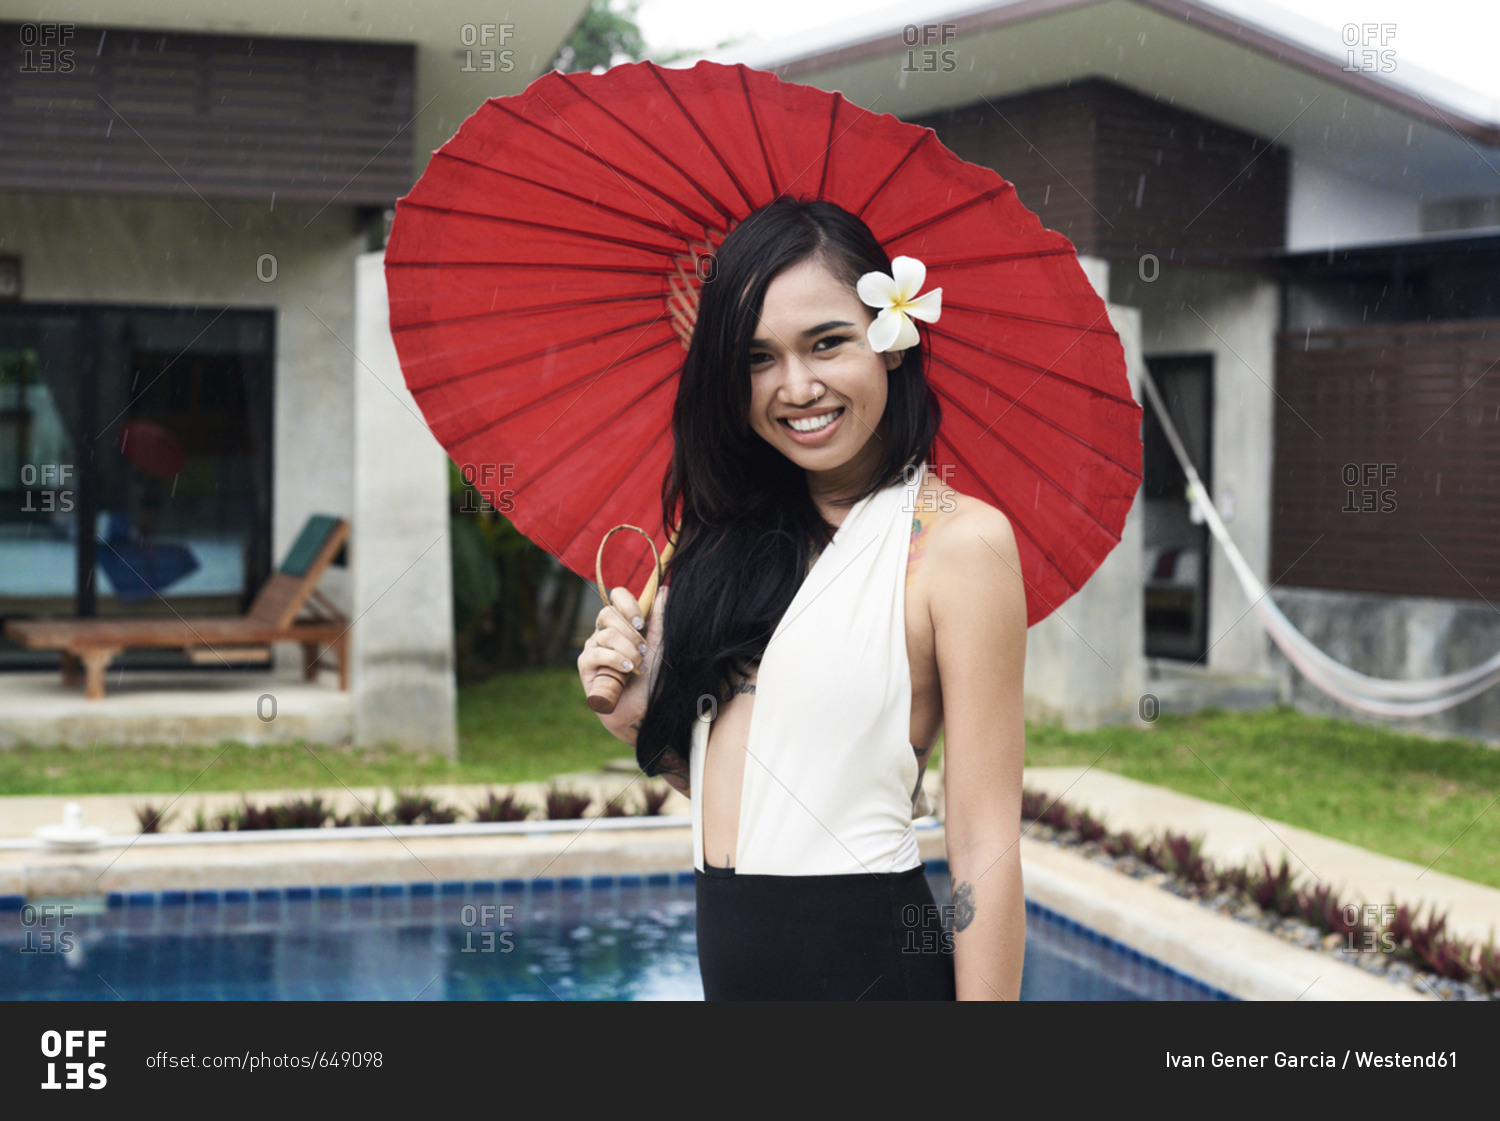 Portrait of smiling woman with flower in her hair holding a red traditional umbrella at a swimming pool